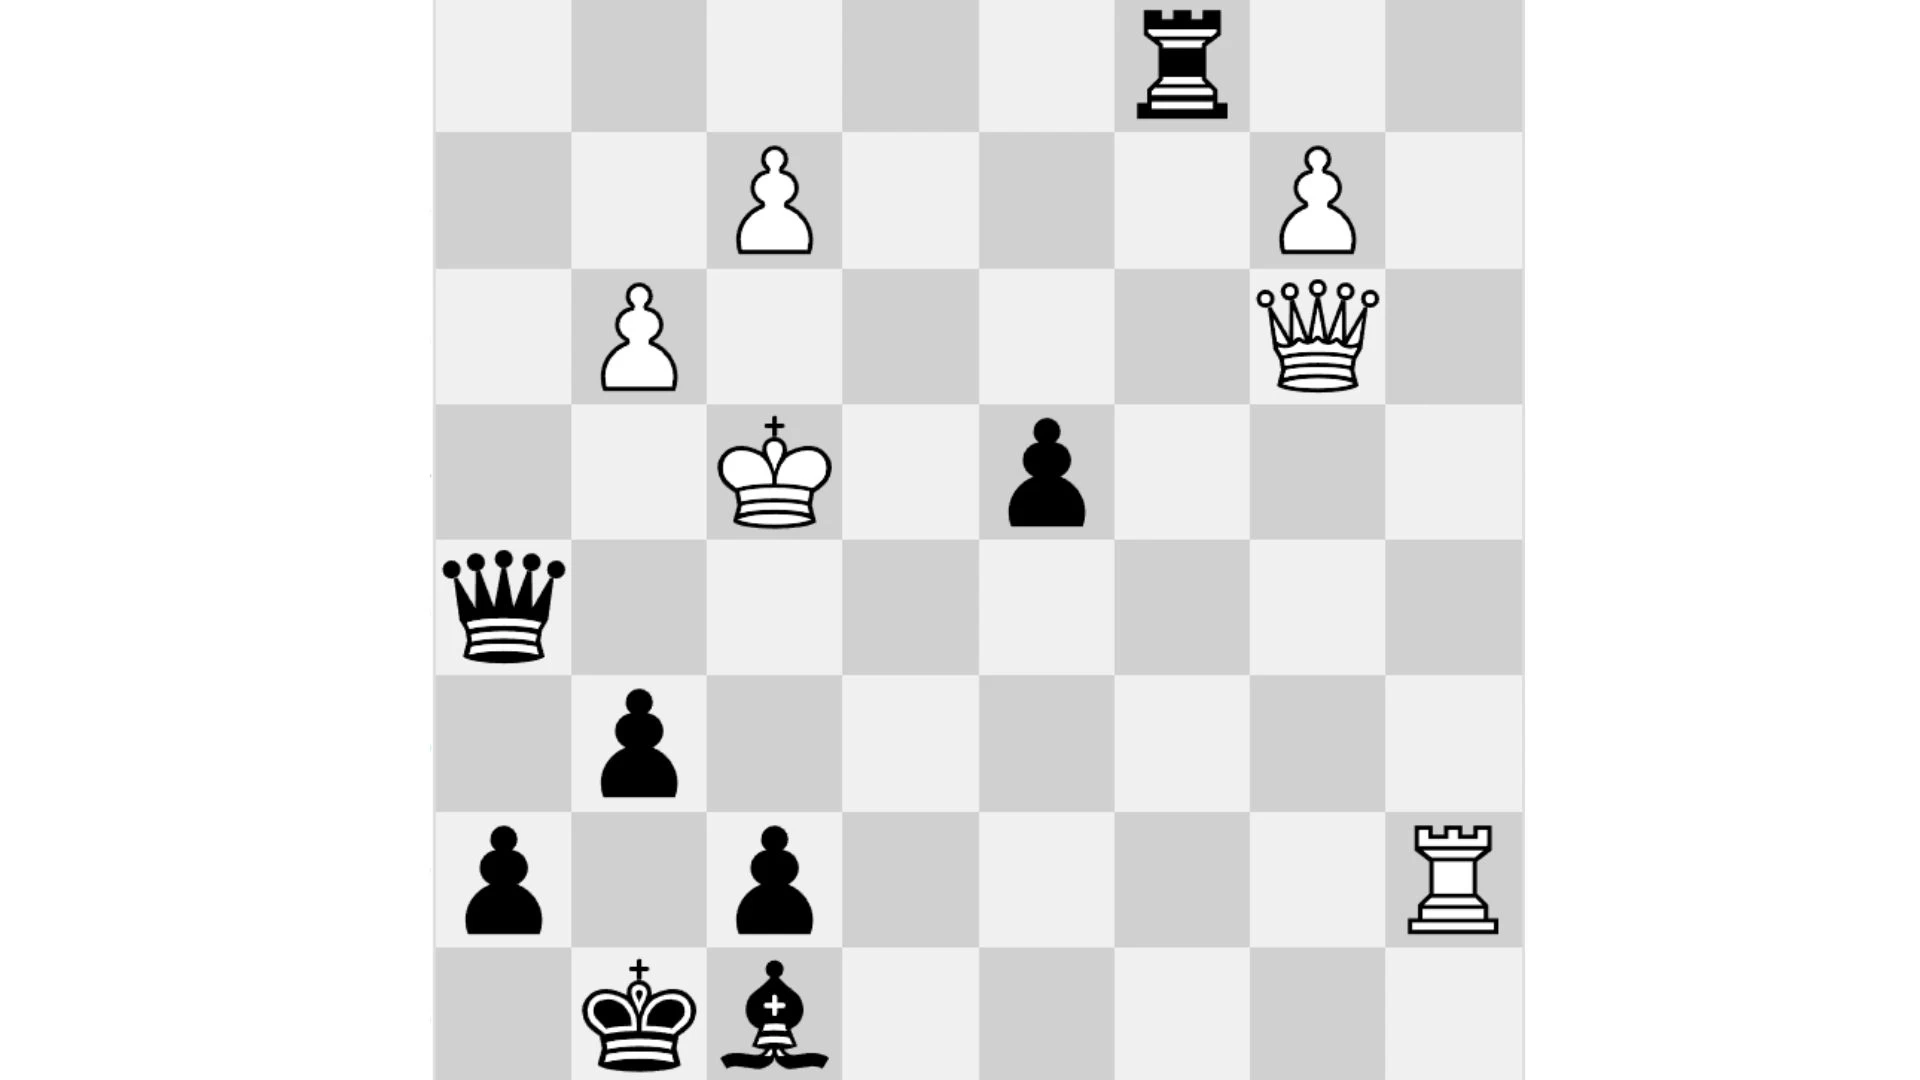 Can You Solve This Chess Puzzle with Just One Move?